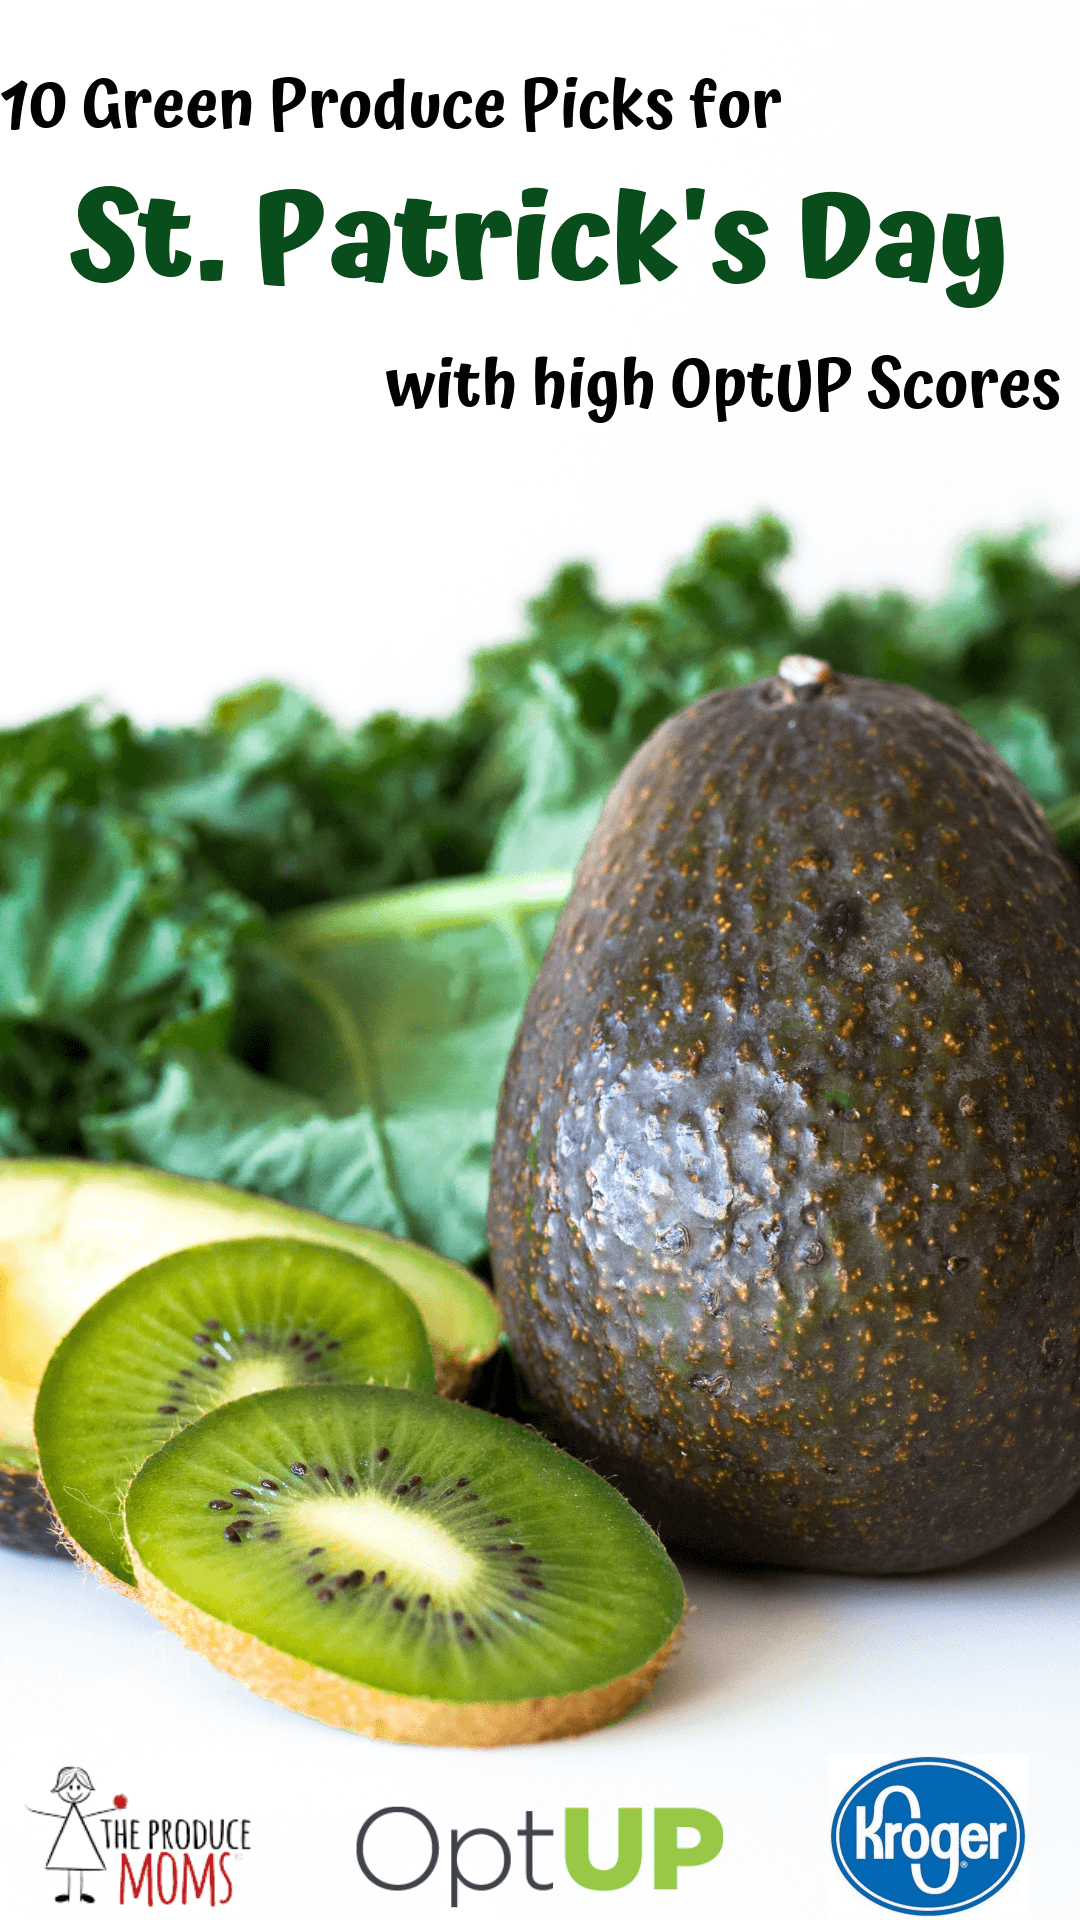 10 St. Patrick’s Day Green Produce Picks with Great Scores on Kroger’s OptUP App